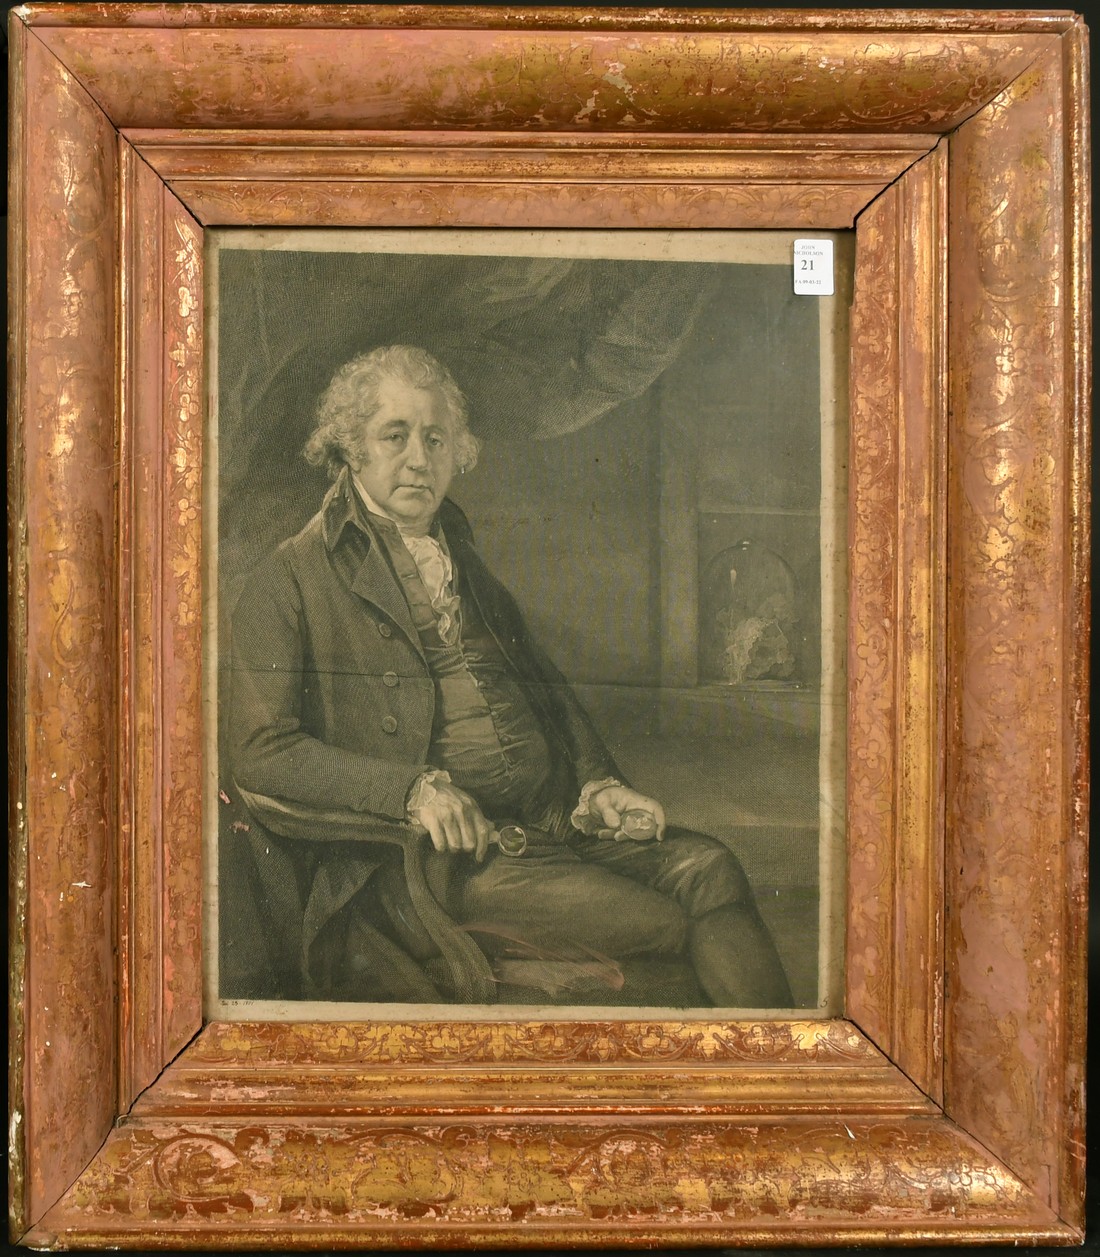 An engraving of a seated gentleman holding a miniature portrait, dated 1801, in a fine quality - Image 2 of 3